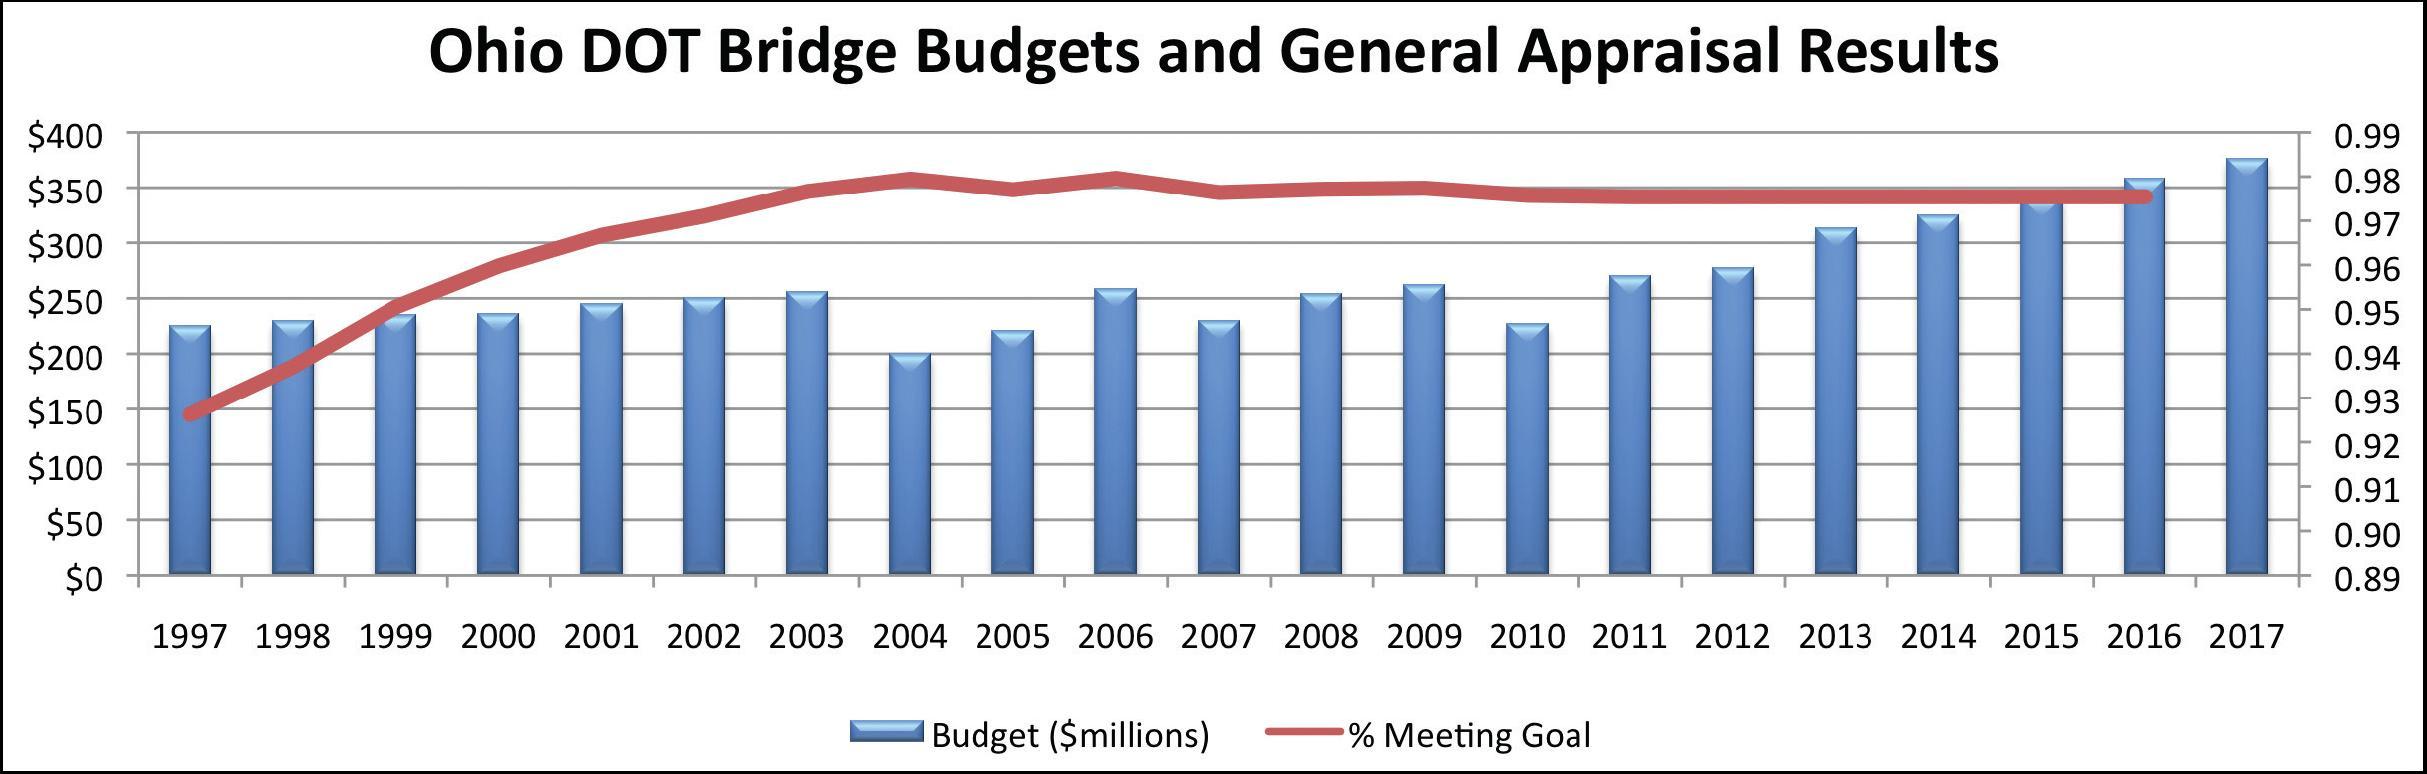 Figure 36 illustrates the amount of bridge budgets each year from 1997 through 2017 in Ohio with a contrasting trend line illustrating the percentage of bridge area meeting the general appraisal goal.  Expenditures rose each year from approximately 225 million in 1997 to about 360 million in 2017.  Meanwhile the percent of bridge areas meeting the general appraisal goals statewide rose from 92 point six percent to 98 percent.